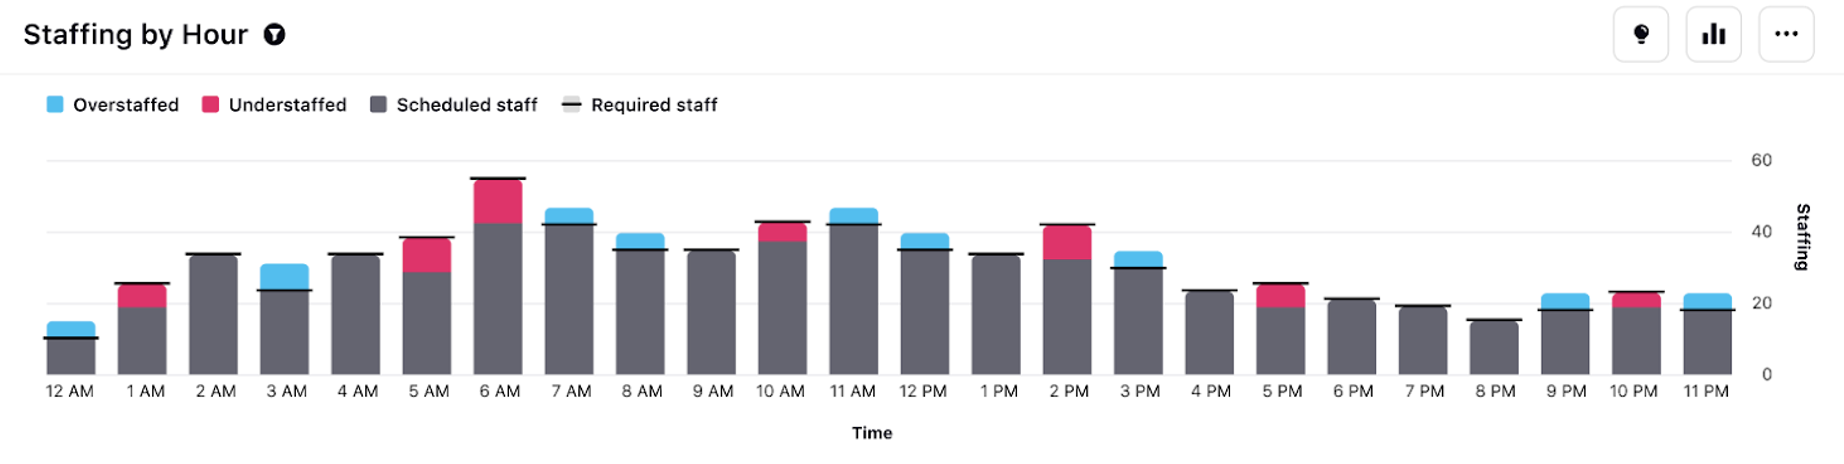 A bar chart displays the staffing status of a contact center on an hourly basis from 12:00 am to 11:00 pm. The chart provides a visual representation of the number of staff available in the contact center at each hour of the day. By presenting this information in a clear and concise format, the chart allows the viewer to easily assess the center's staffing patterns over the course of a day.